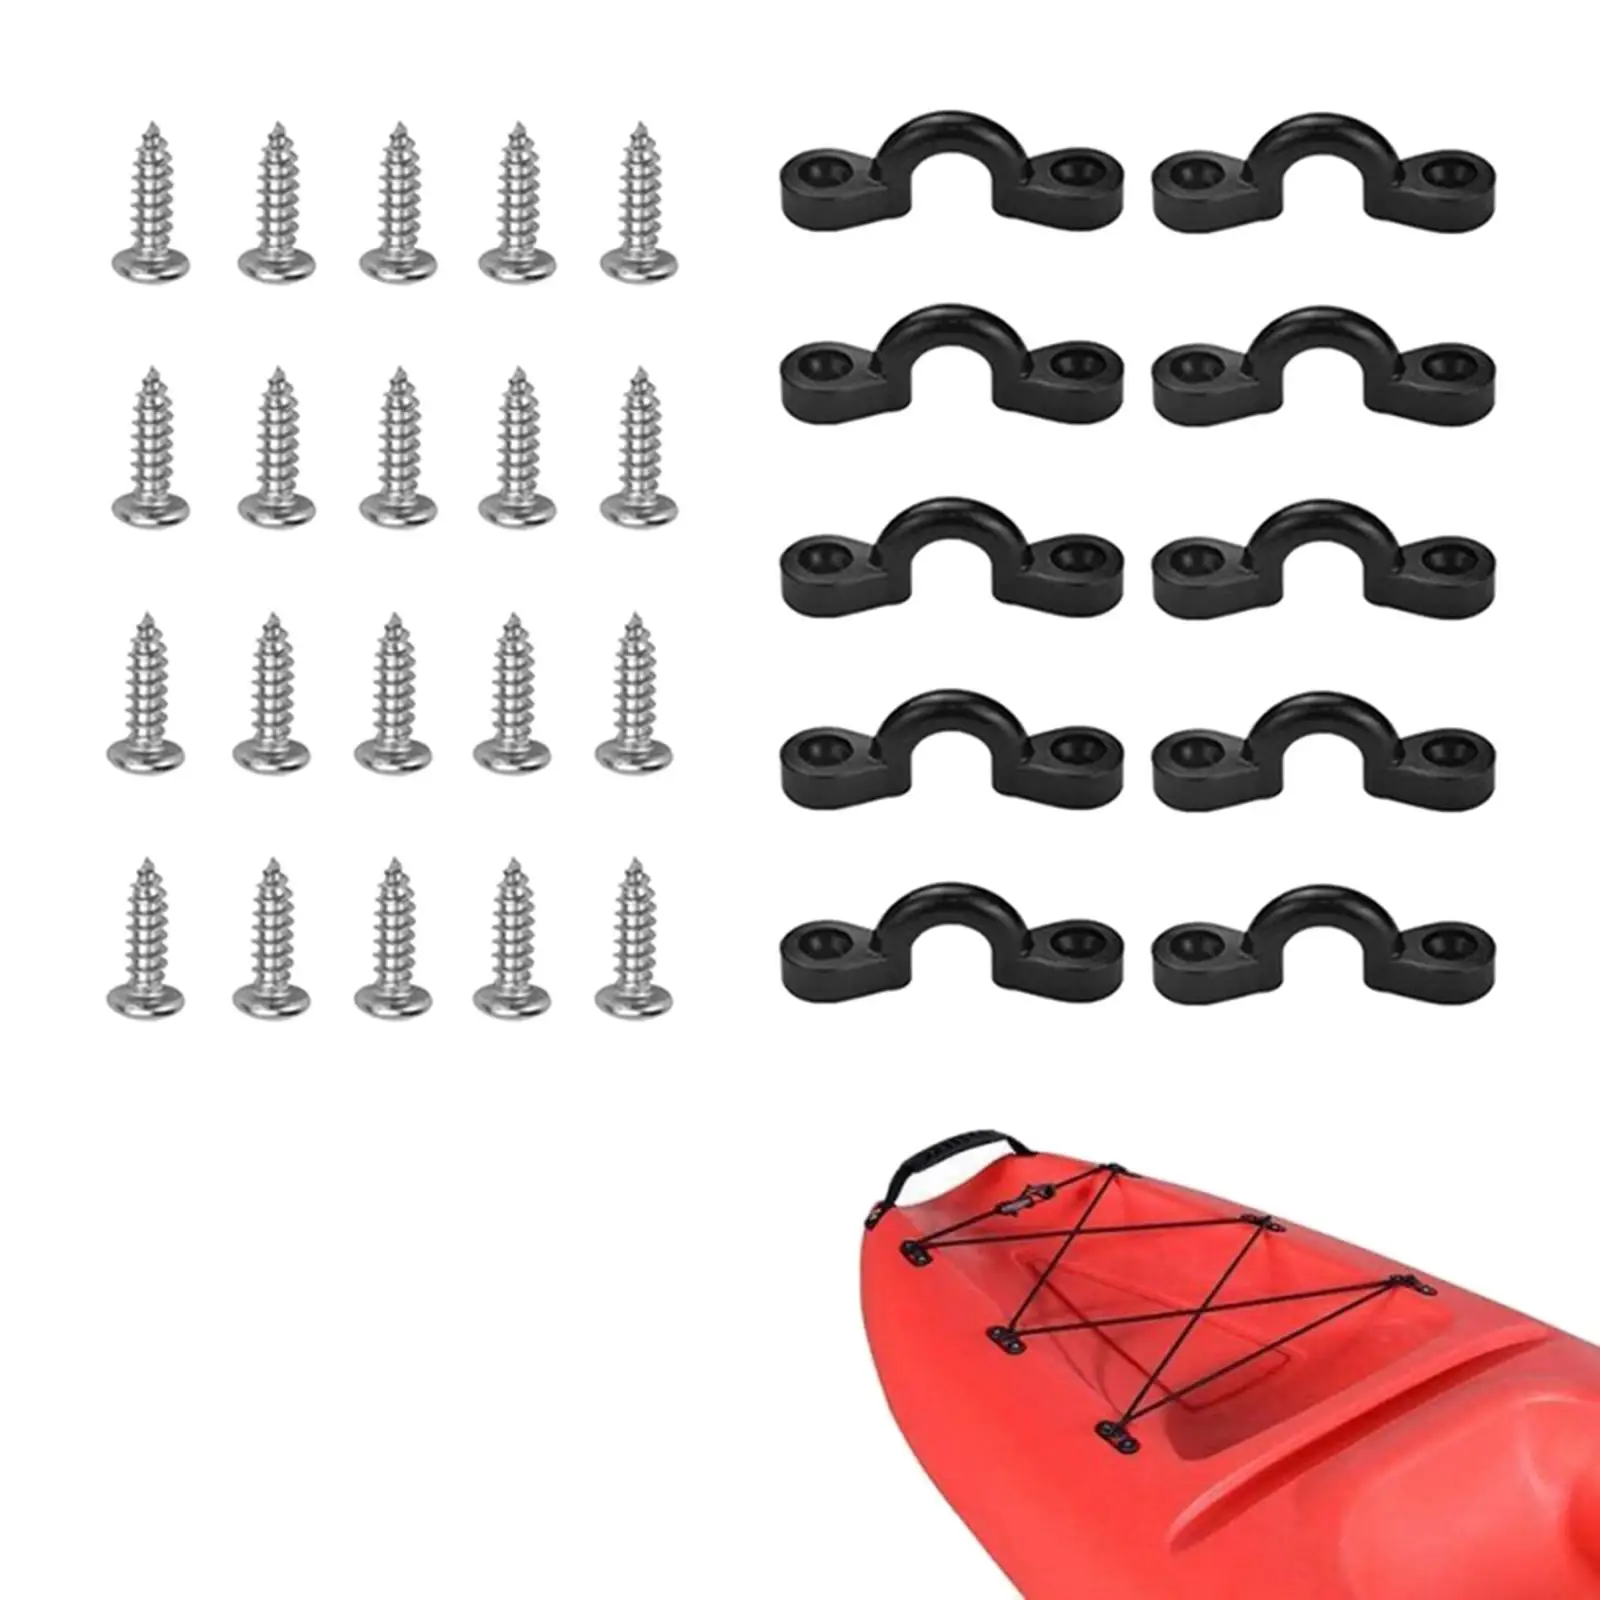 10x Kayak Pad Eye, C Type Carry Handle Buckle Eyelets Fittings Deck Rigging Set Nylon Bungee Deck Loops Tie Down for Boats